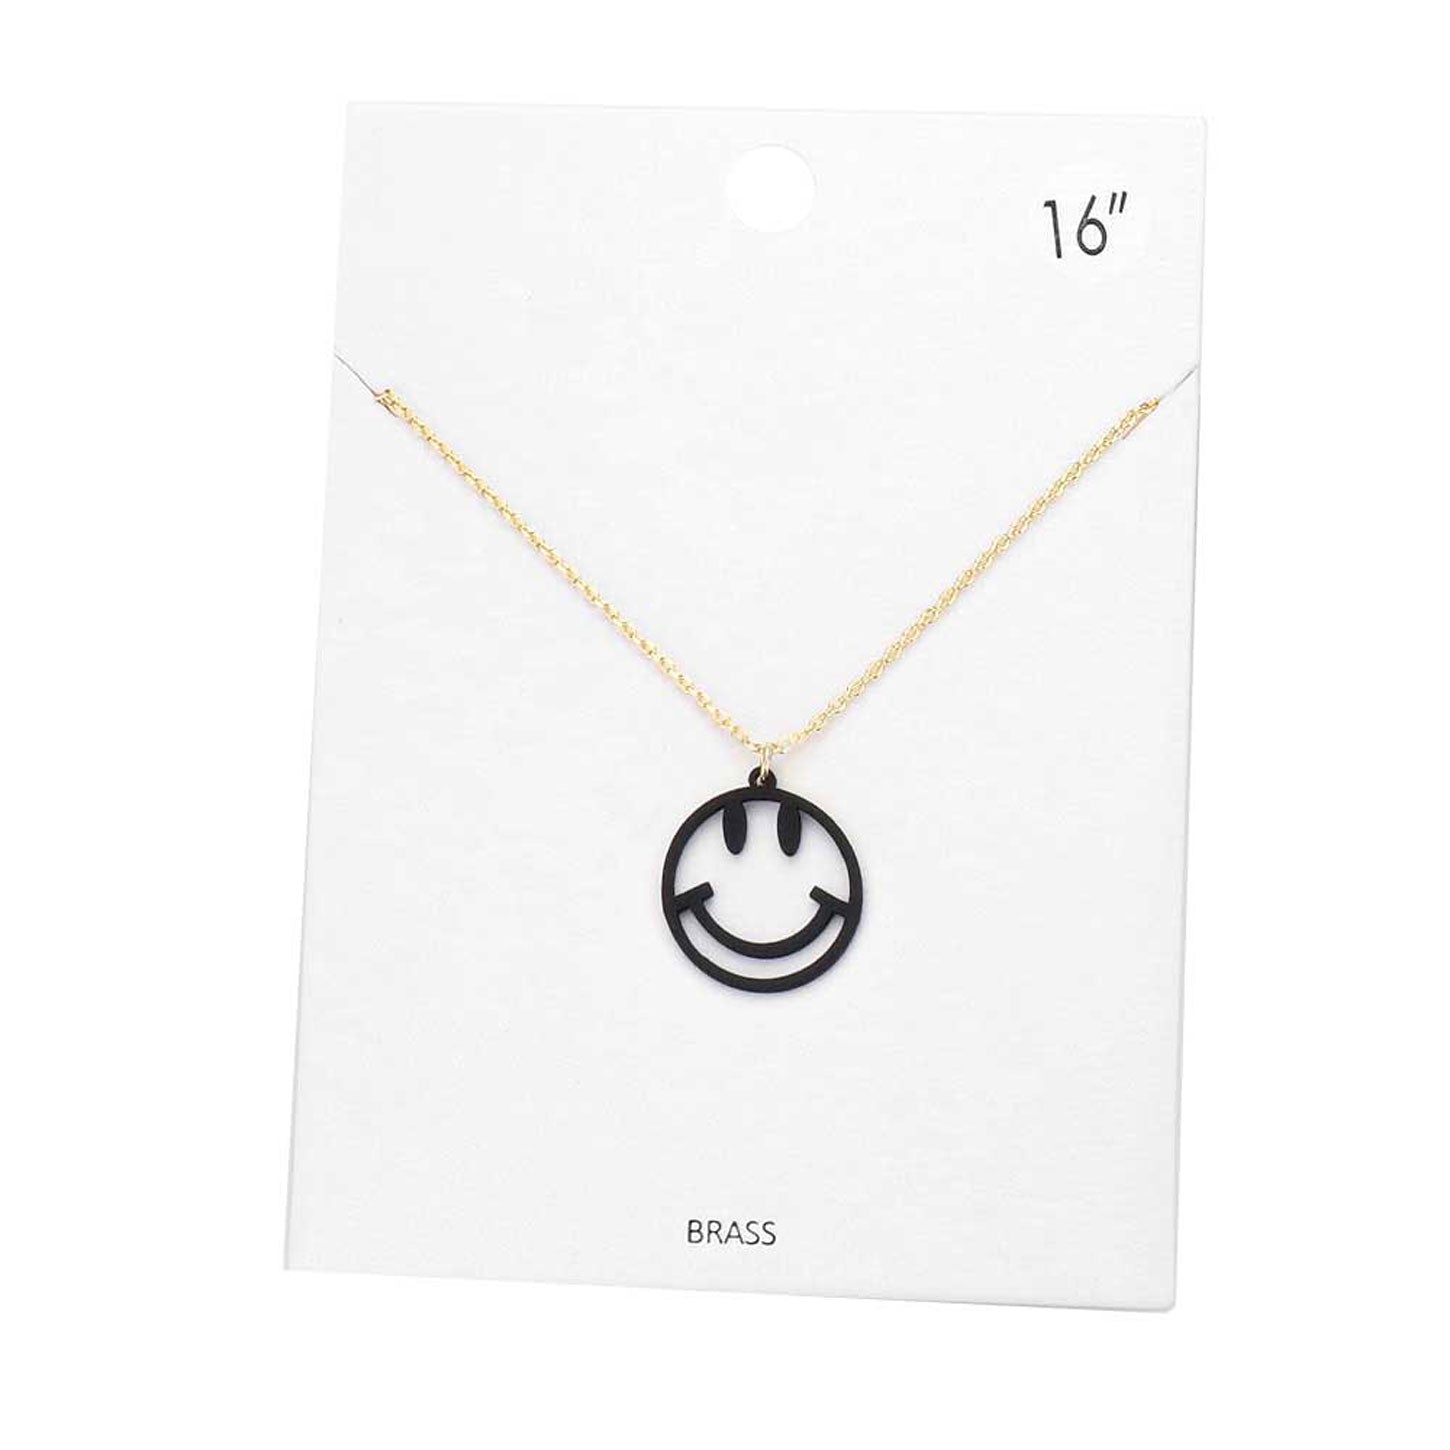 Black Brass Metal Smile Pendant Necklace, Get ready with these Pendant Necklace, put on a pop of color to complete your ensemble. Perfect for adding just the right amount of shimmer & shine and a touch of class to special events. Perfect Birthday Gift, Anniversary Gift, Mother's Day Gift or any special occasion.